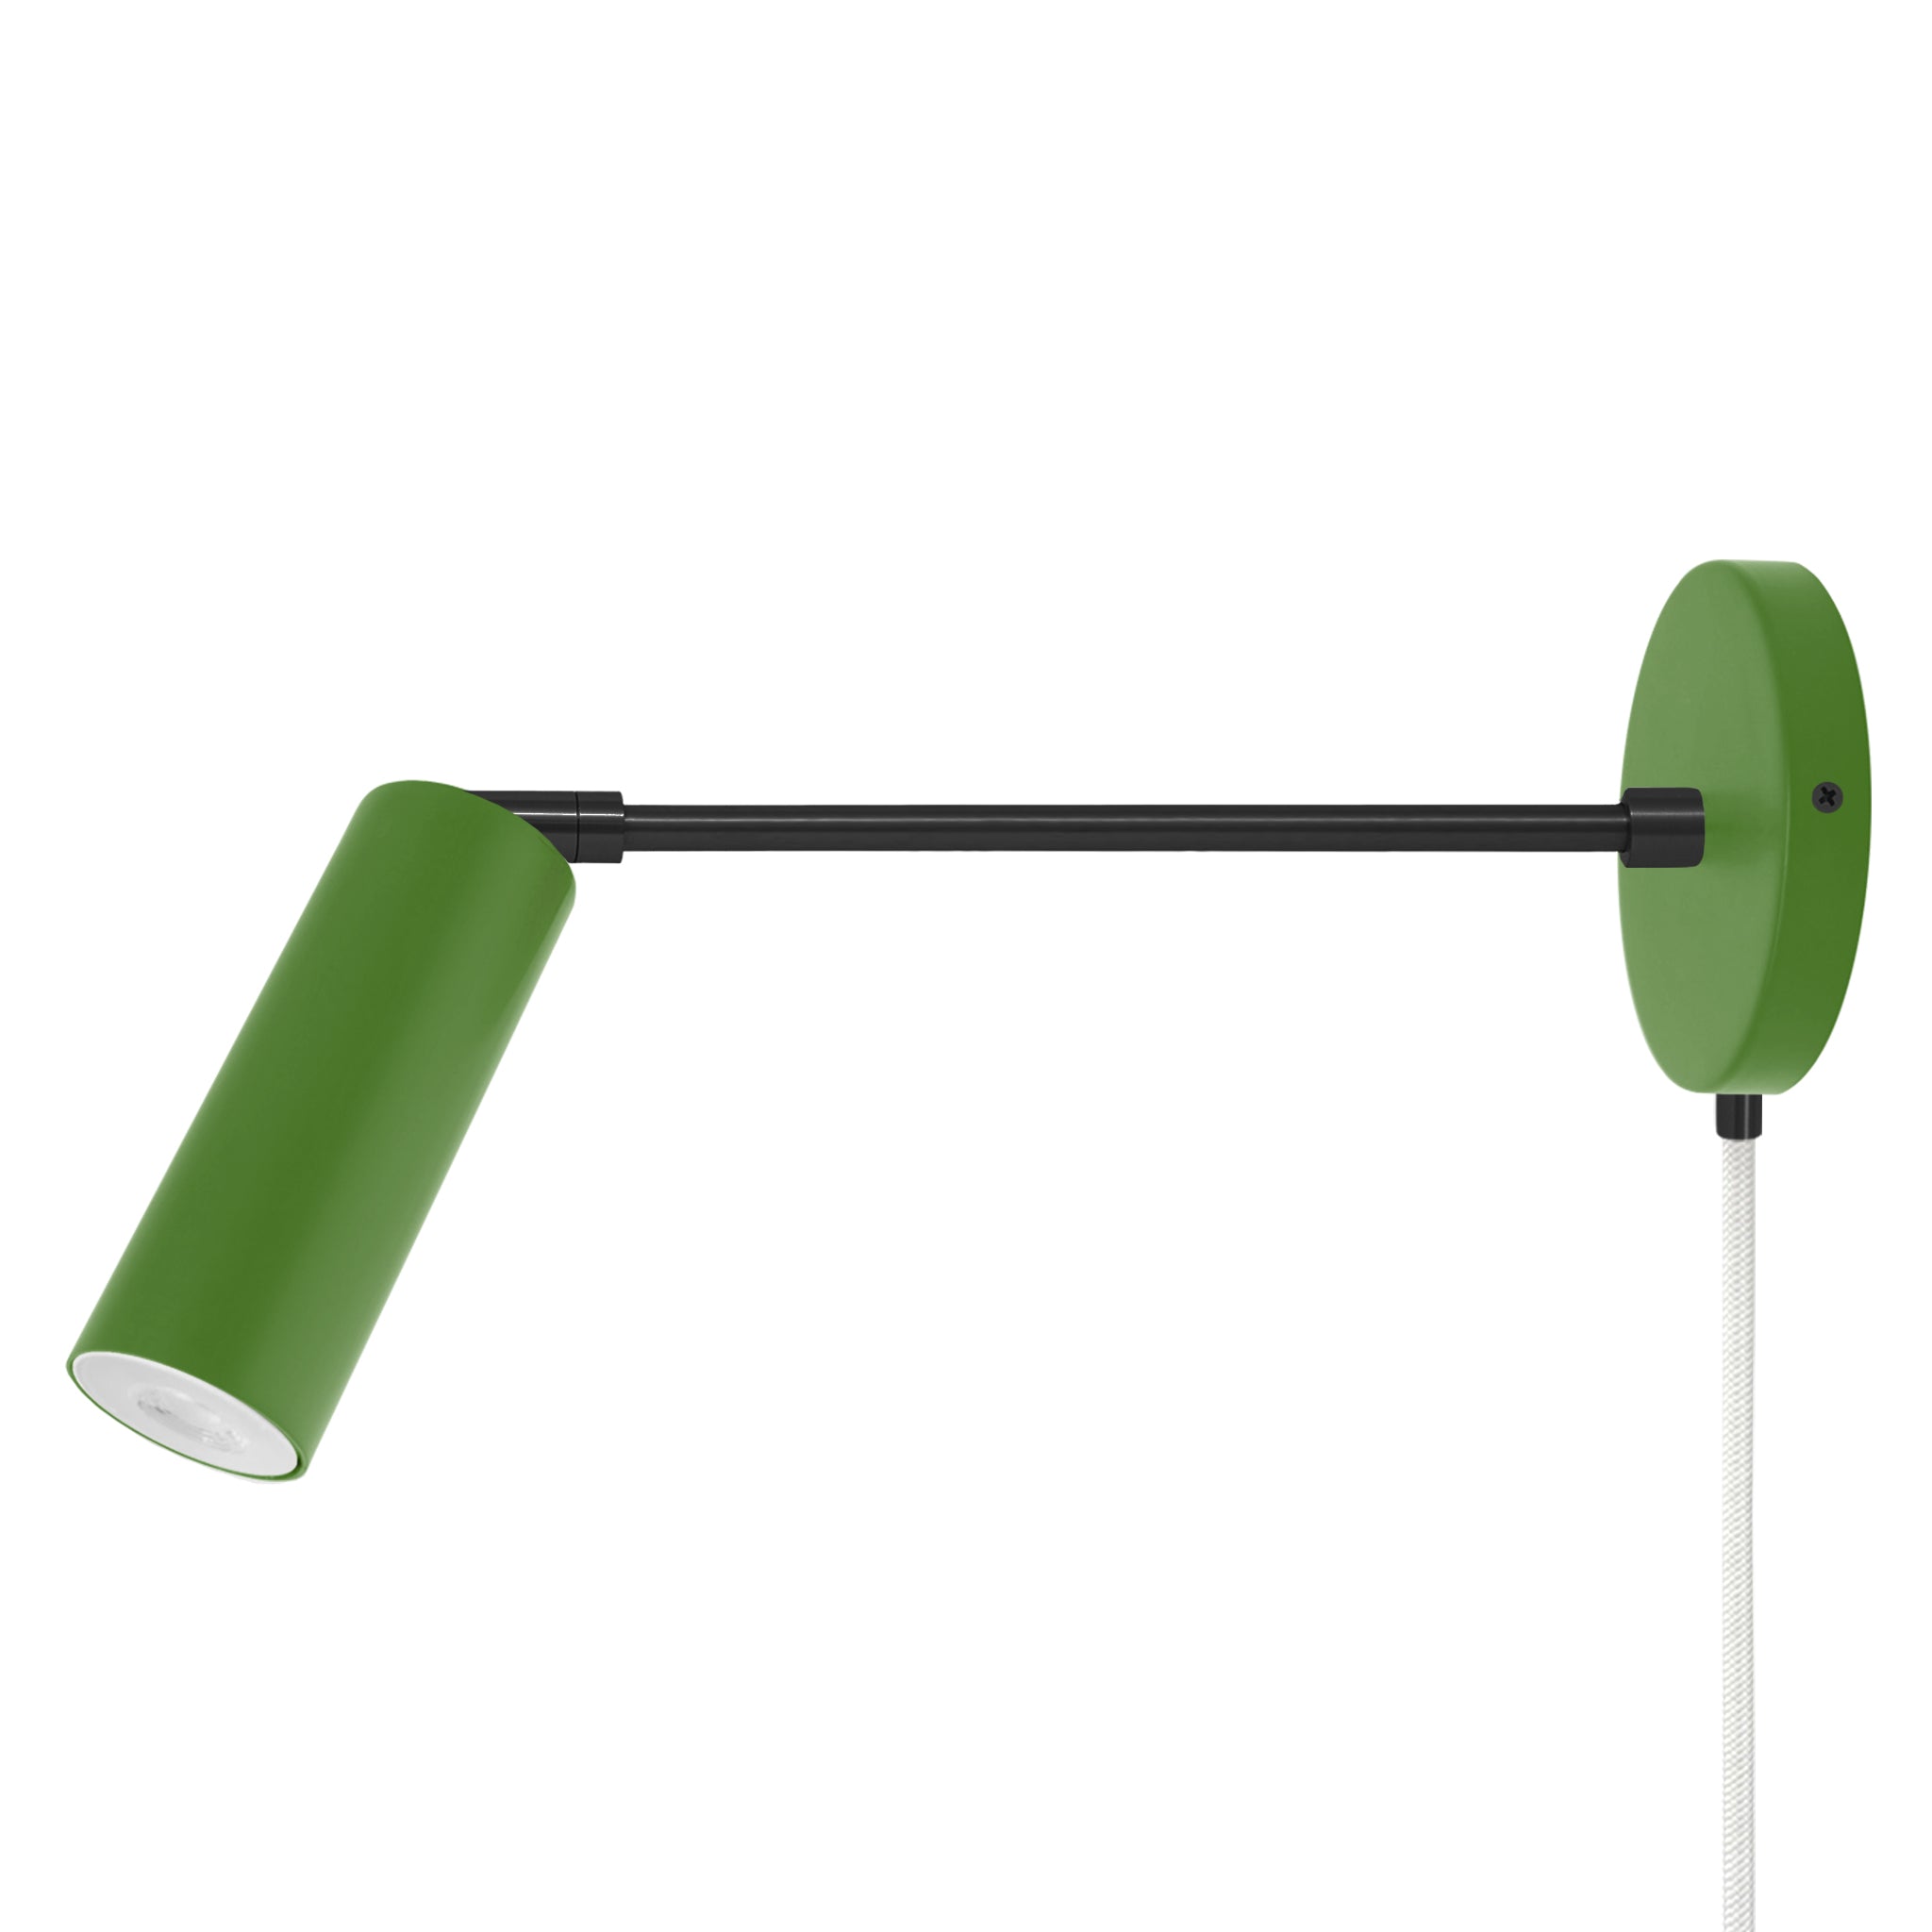 Black and python green color Reader plug-in sconce 10" arm Dutton Brown lighting